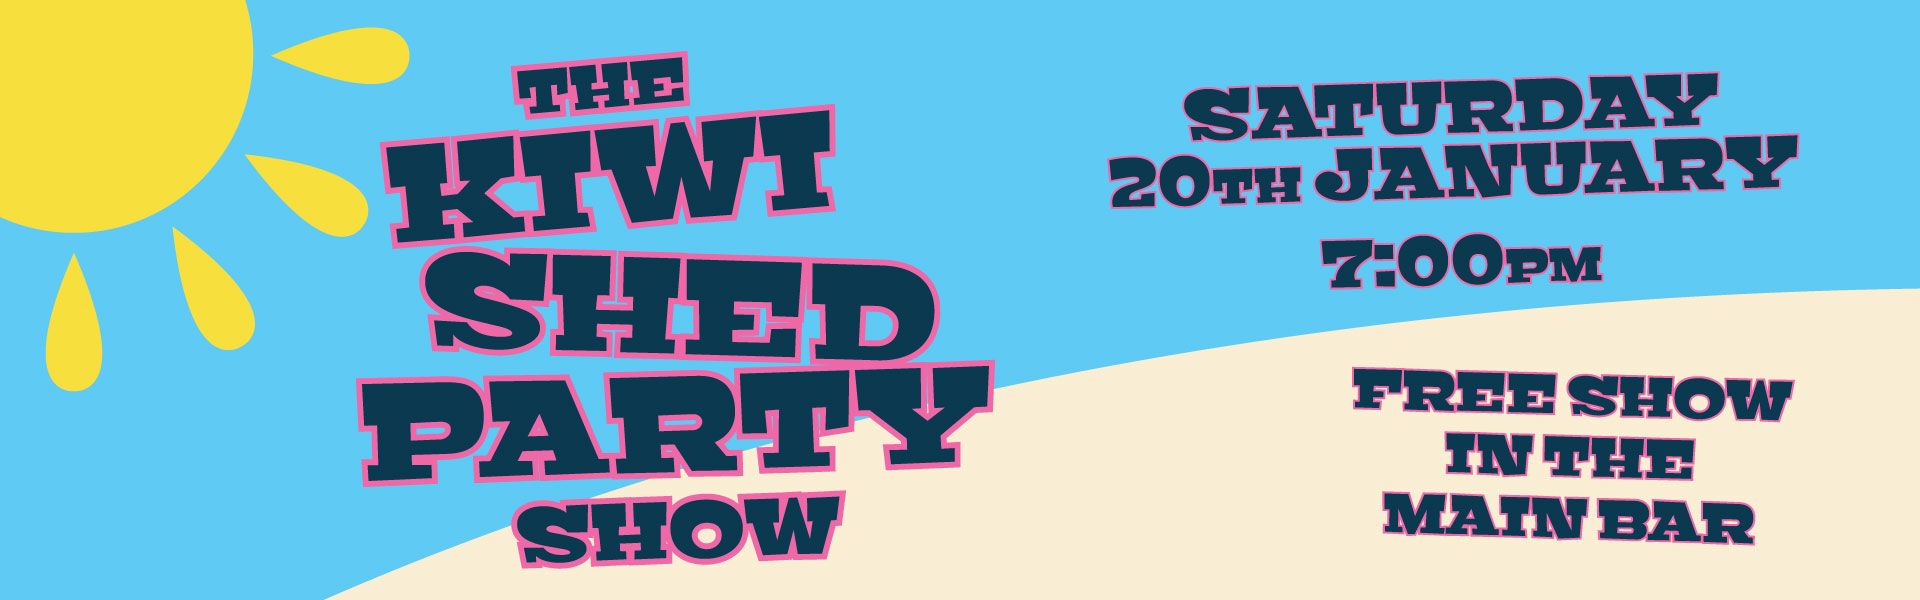 Kiwi Shed Party Homepage